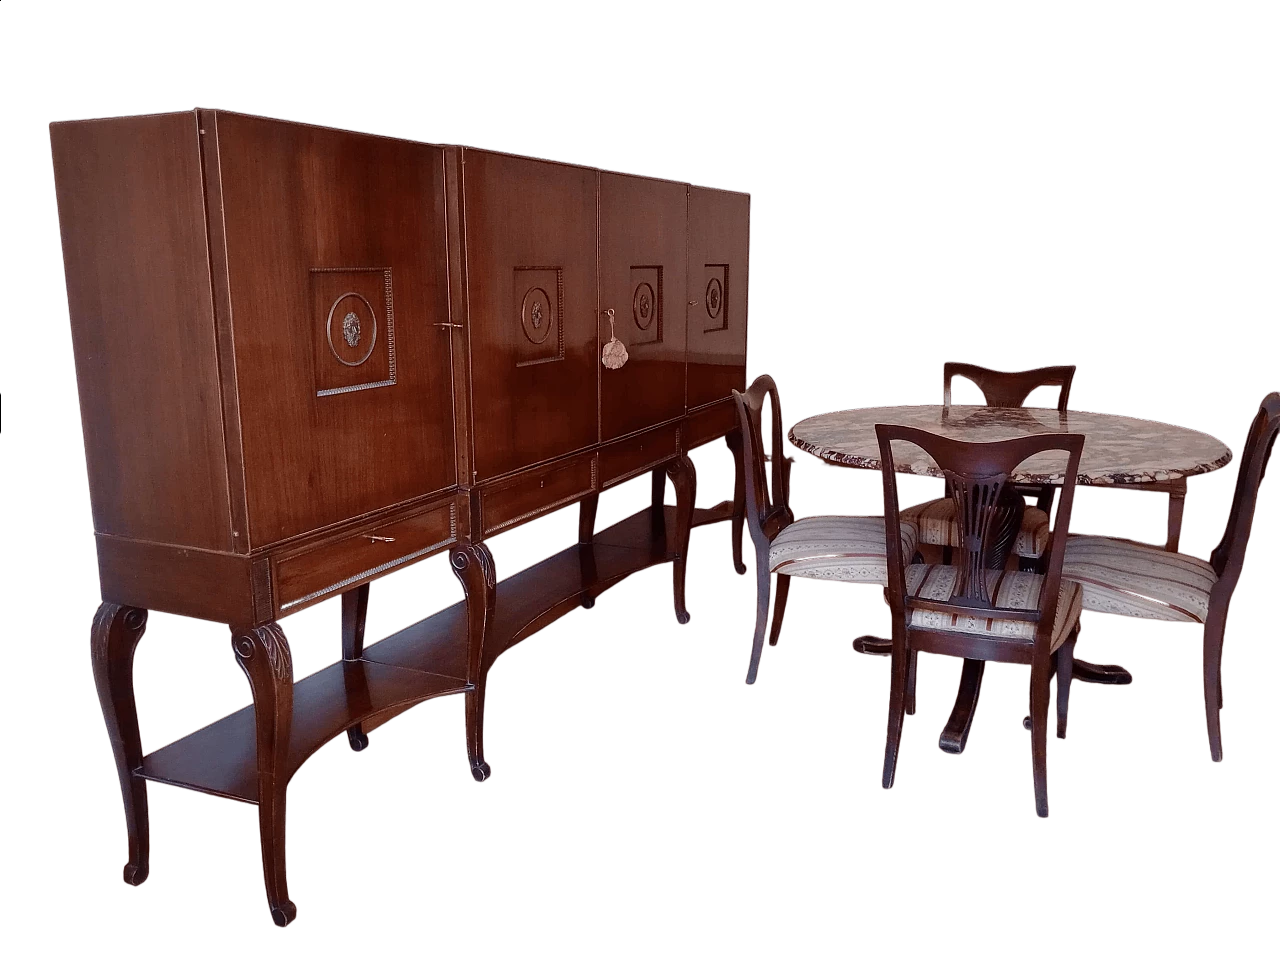 4 Mahogany chairs, sideboard and table with purple Calacatta marble top by Fratelli Barni Mobili d'Arte Seveso, 1950s 24